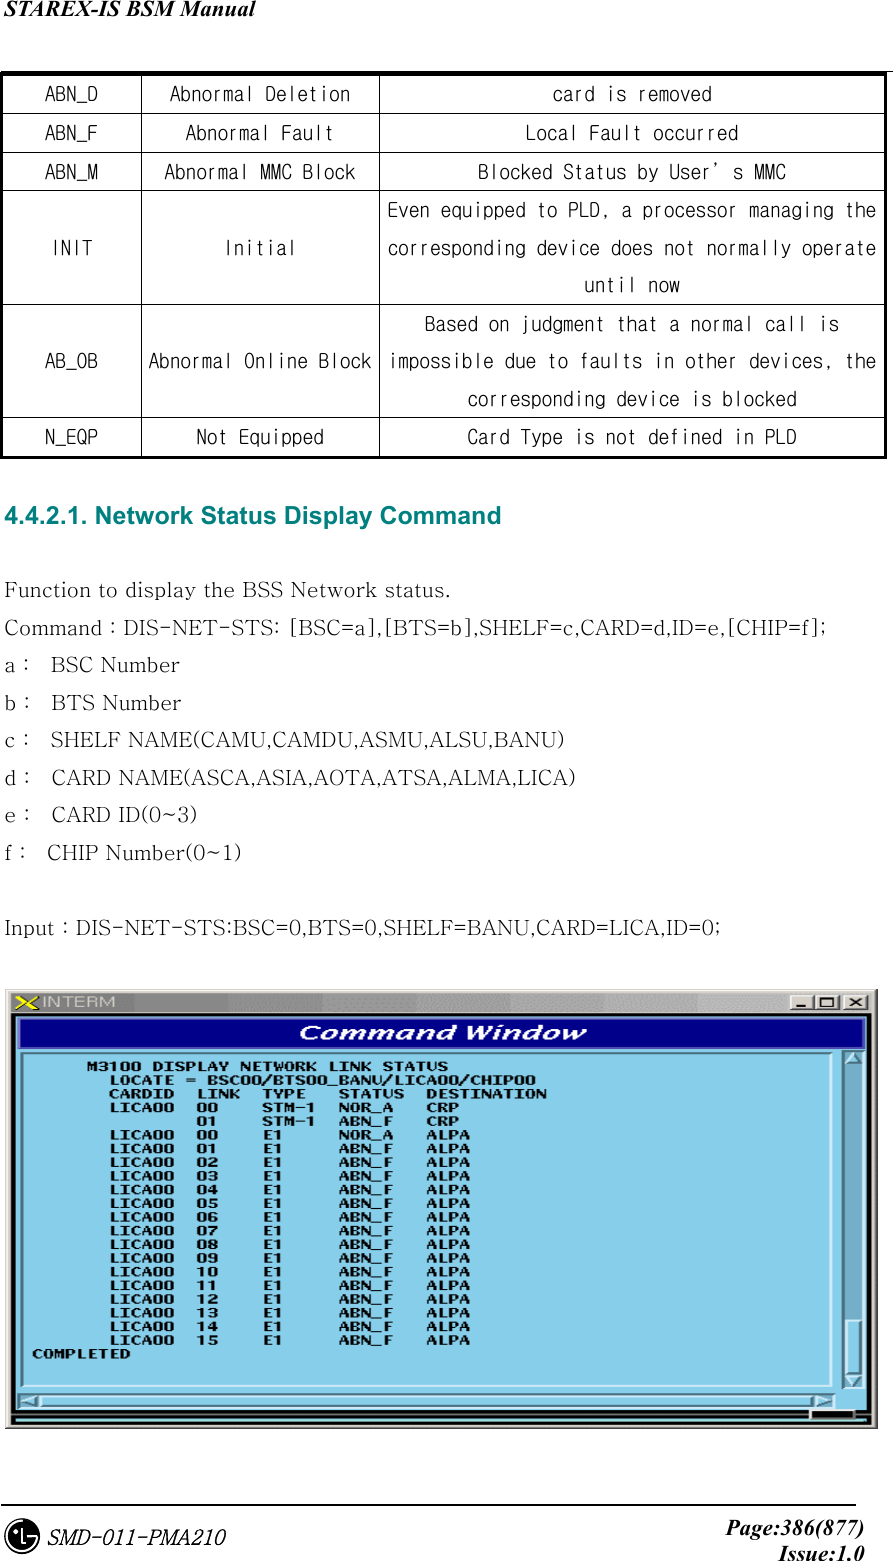 STAREX-IS BSM Manual     Page:386(877)Issue:1.0SMD-011-PMA210 ABN_D  Abnormal Deletion  card is removed ABN_F  Abnormal Fault  Local Fault occurred ABN_M  Abnormal MMC Block  Blocked Status by User’s MMC  INIT  Initial Even equipped to PLD, a processor managing the corresponding device does not normally operate until now AB_OB  Abnormal Online Block Based on judgment that a normal call is impossible due to faults in other devices, the corresponding device is blocked  N_EQP  Not Equipped  Card Type is not defined in PLD  4.4.2.1. Network Status Display Command  Function to display the BSS Network status. Command : DIS-NET-STS: [BSC=a],[BTS=b],SHELF=c,CARD=d,ID=e,[CHIP=f]; a :  BSC Number b :    BTS Number c :    SHELF NAME(CAMU,CAMDU,ASMU,ALSU,BANU) d :    CARD NAME(ASCA,ASIA,AOTA,ATSA,ALMA,LICA) e :    CARD ID(0~3) f :    CHIP Number(0~1)  Input : DIS-NET-STS:BSC=0,BTS=0,SHELF=BANU,CARD=LICA,ID=0;   